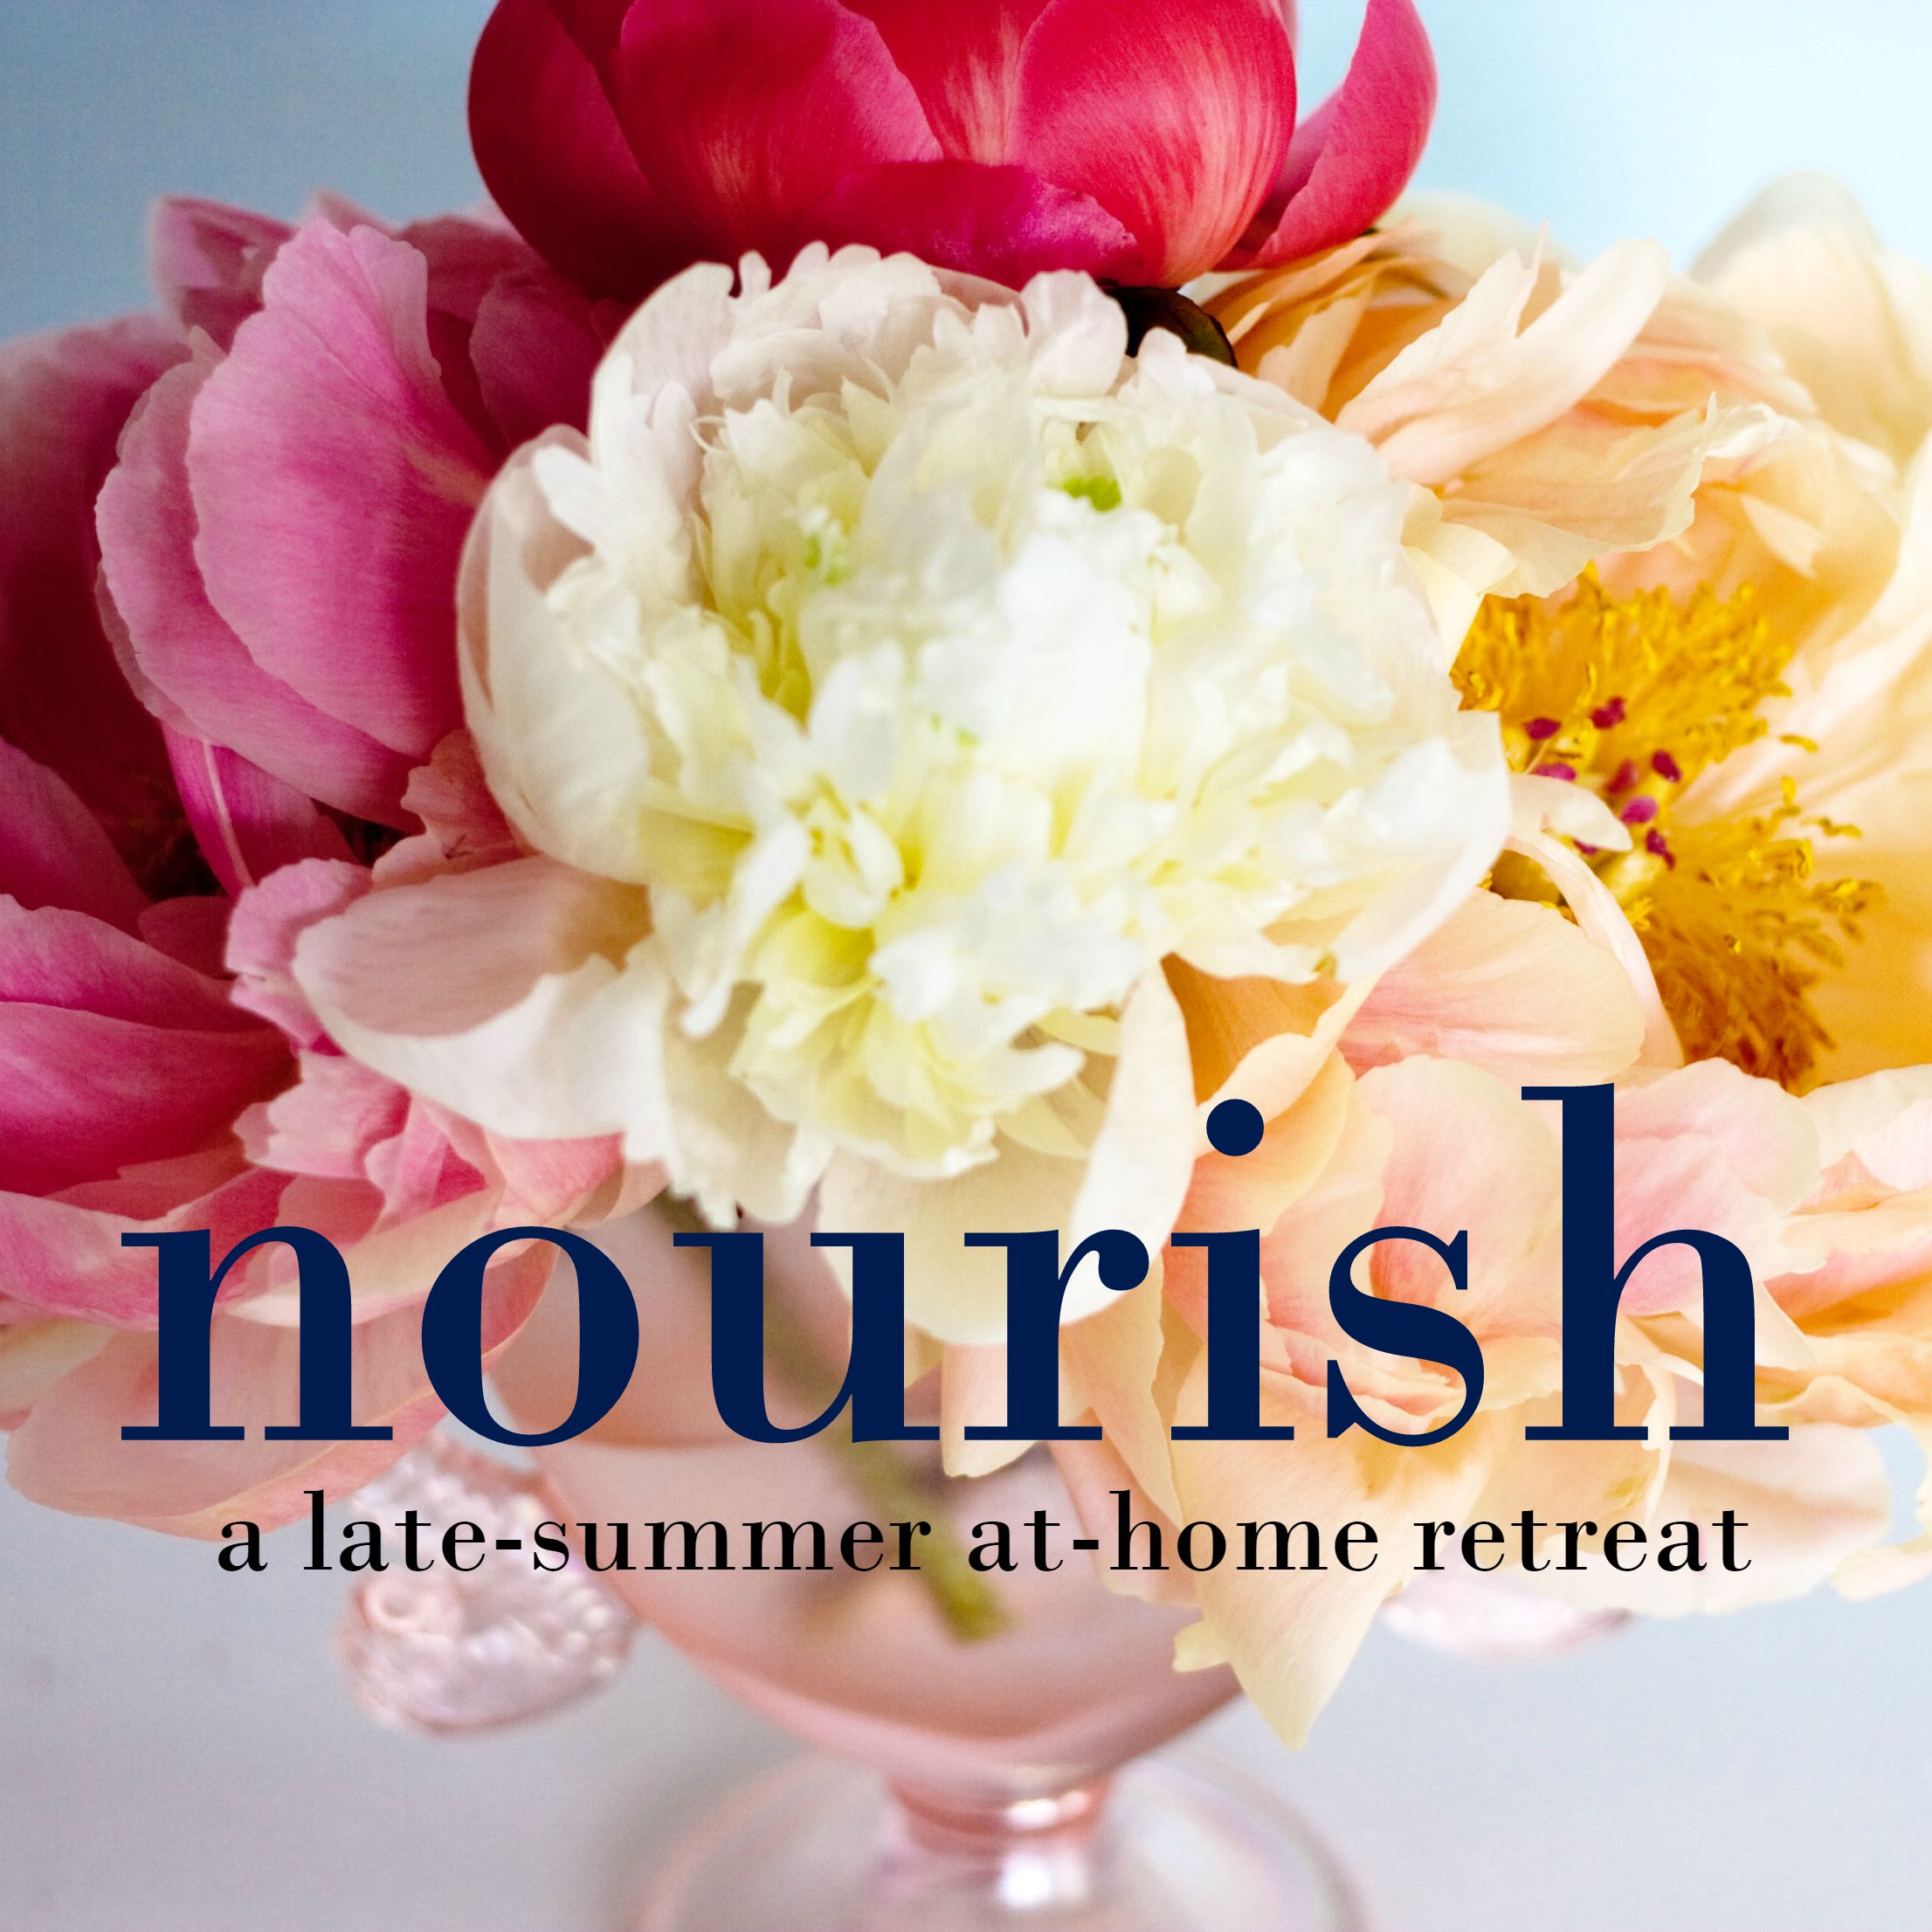 nourish to the core with restorative & yin yoga sessions, recipes and more